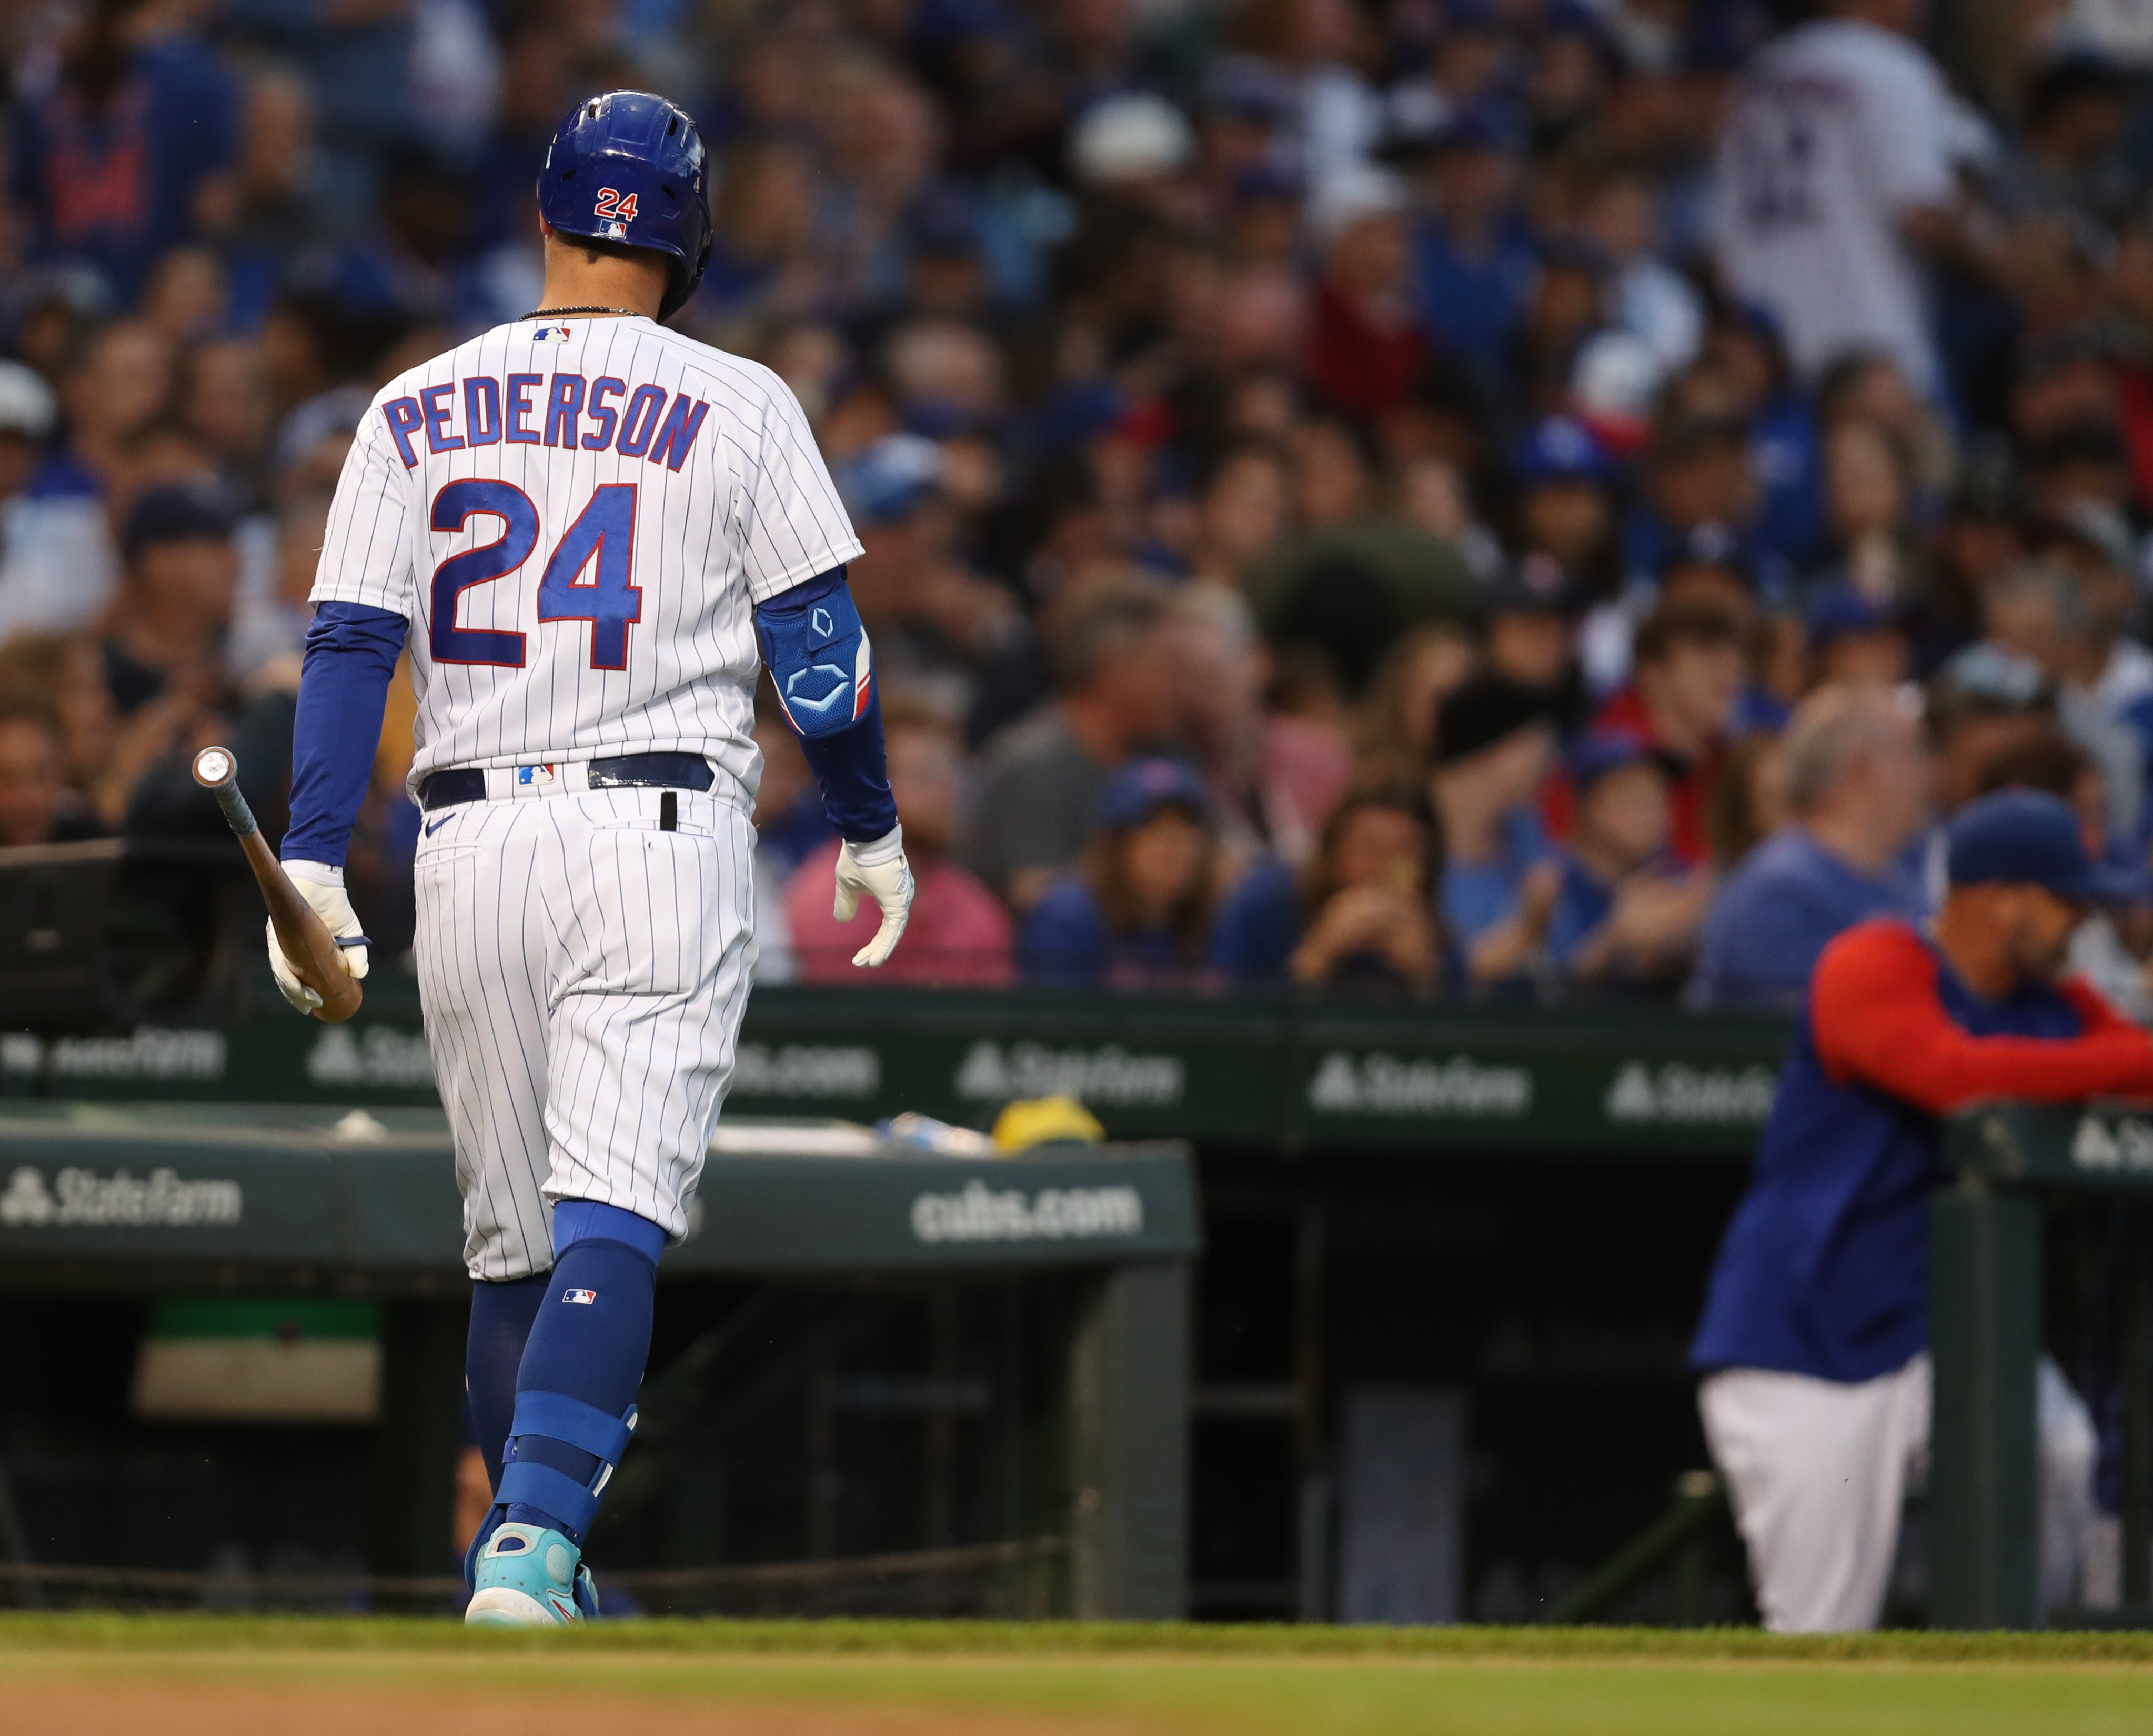 Pederson, Schwarber decline options, become free agents